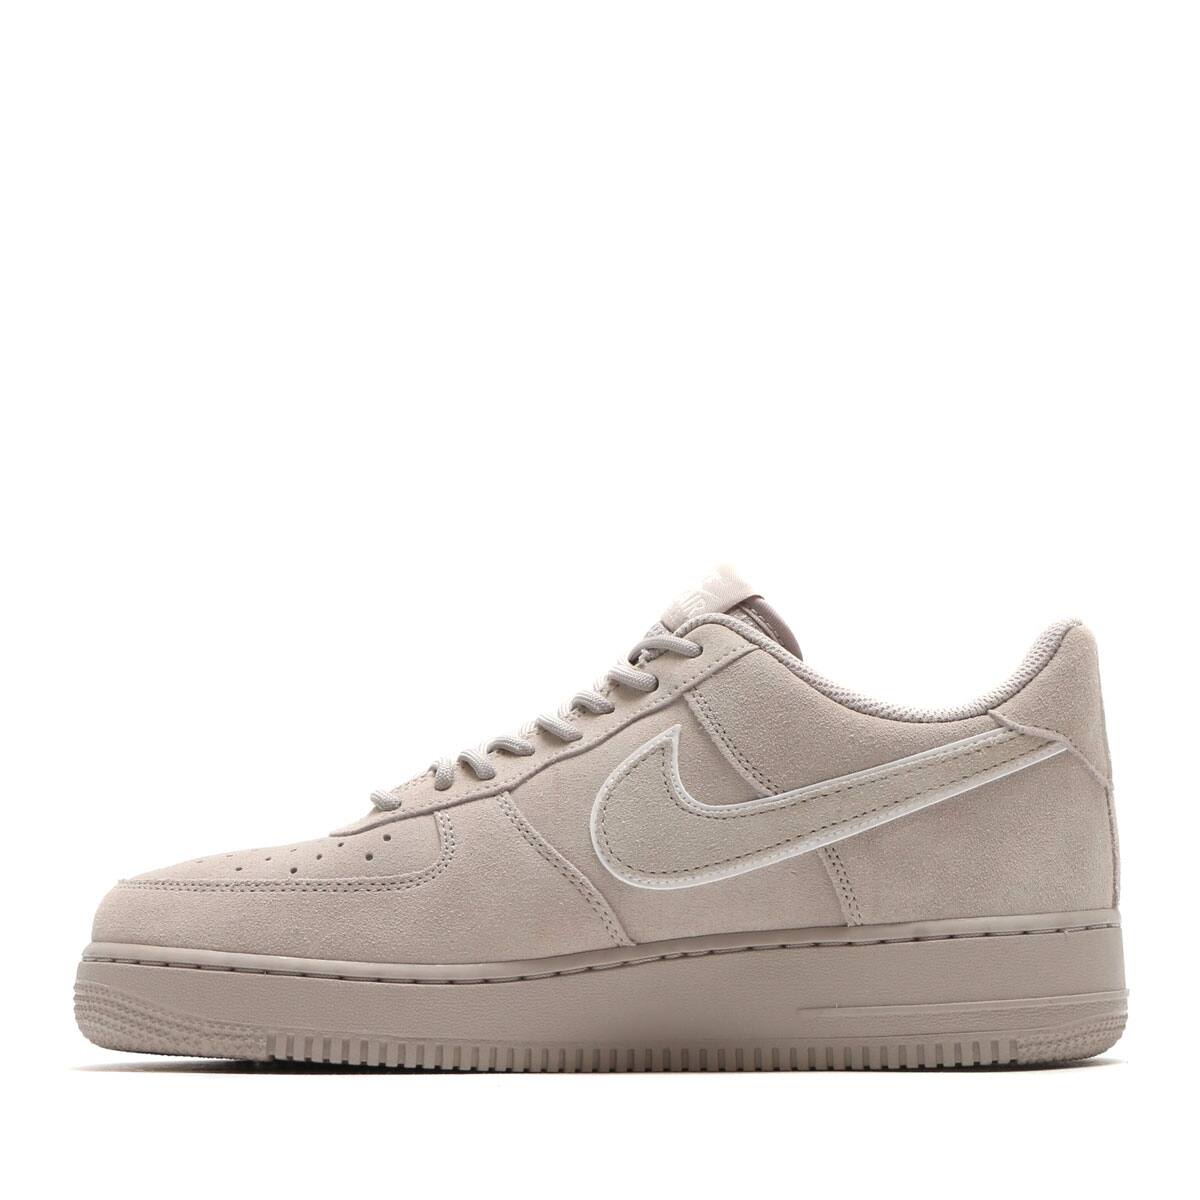 nike air force one 07 lv8 suede